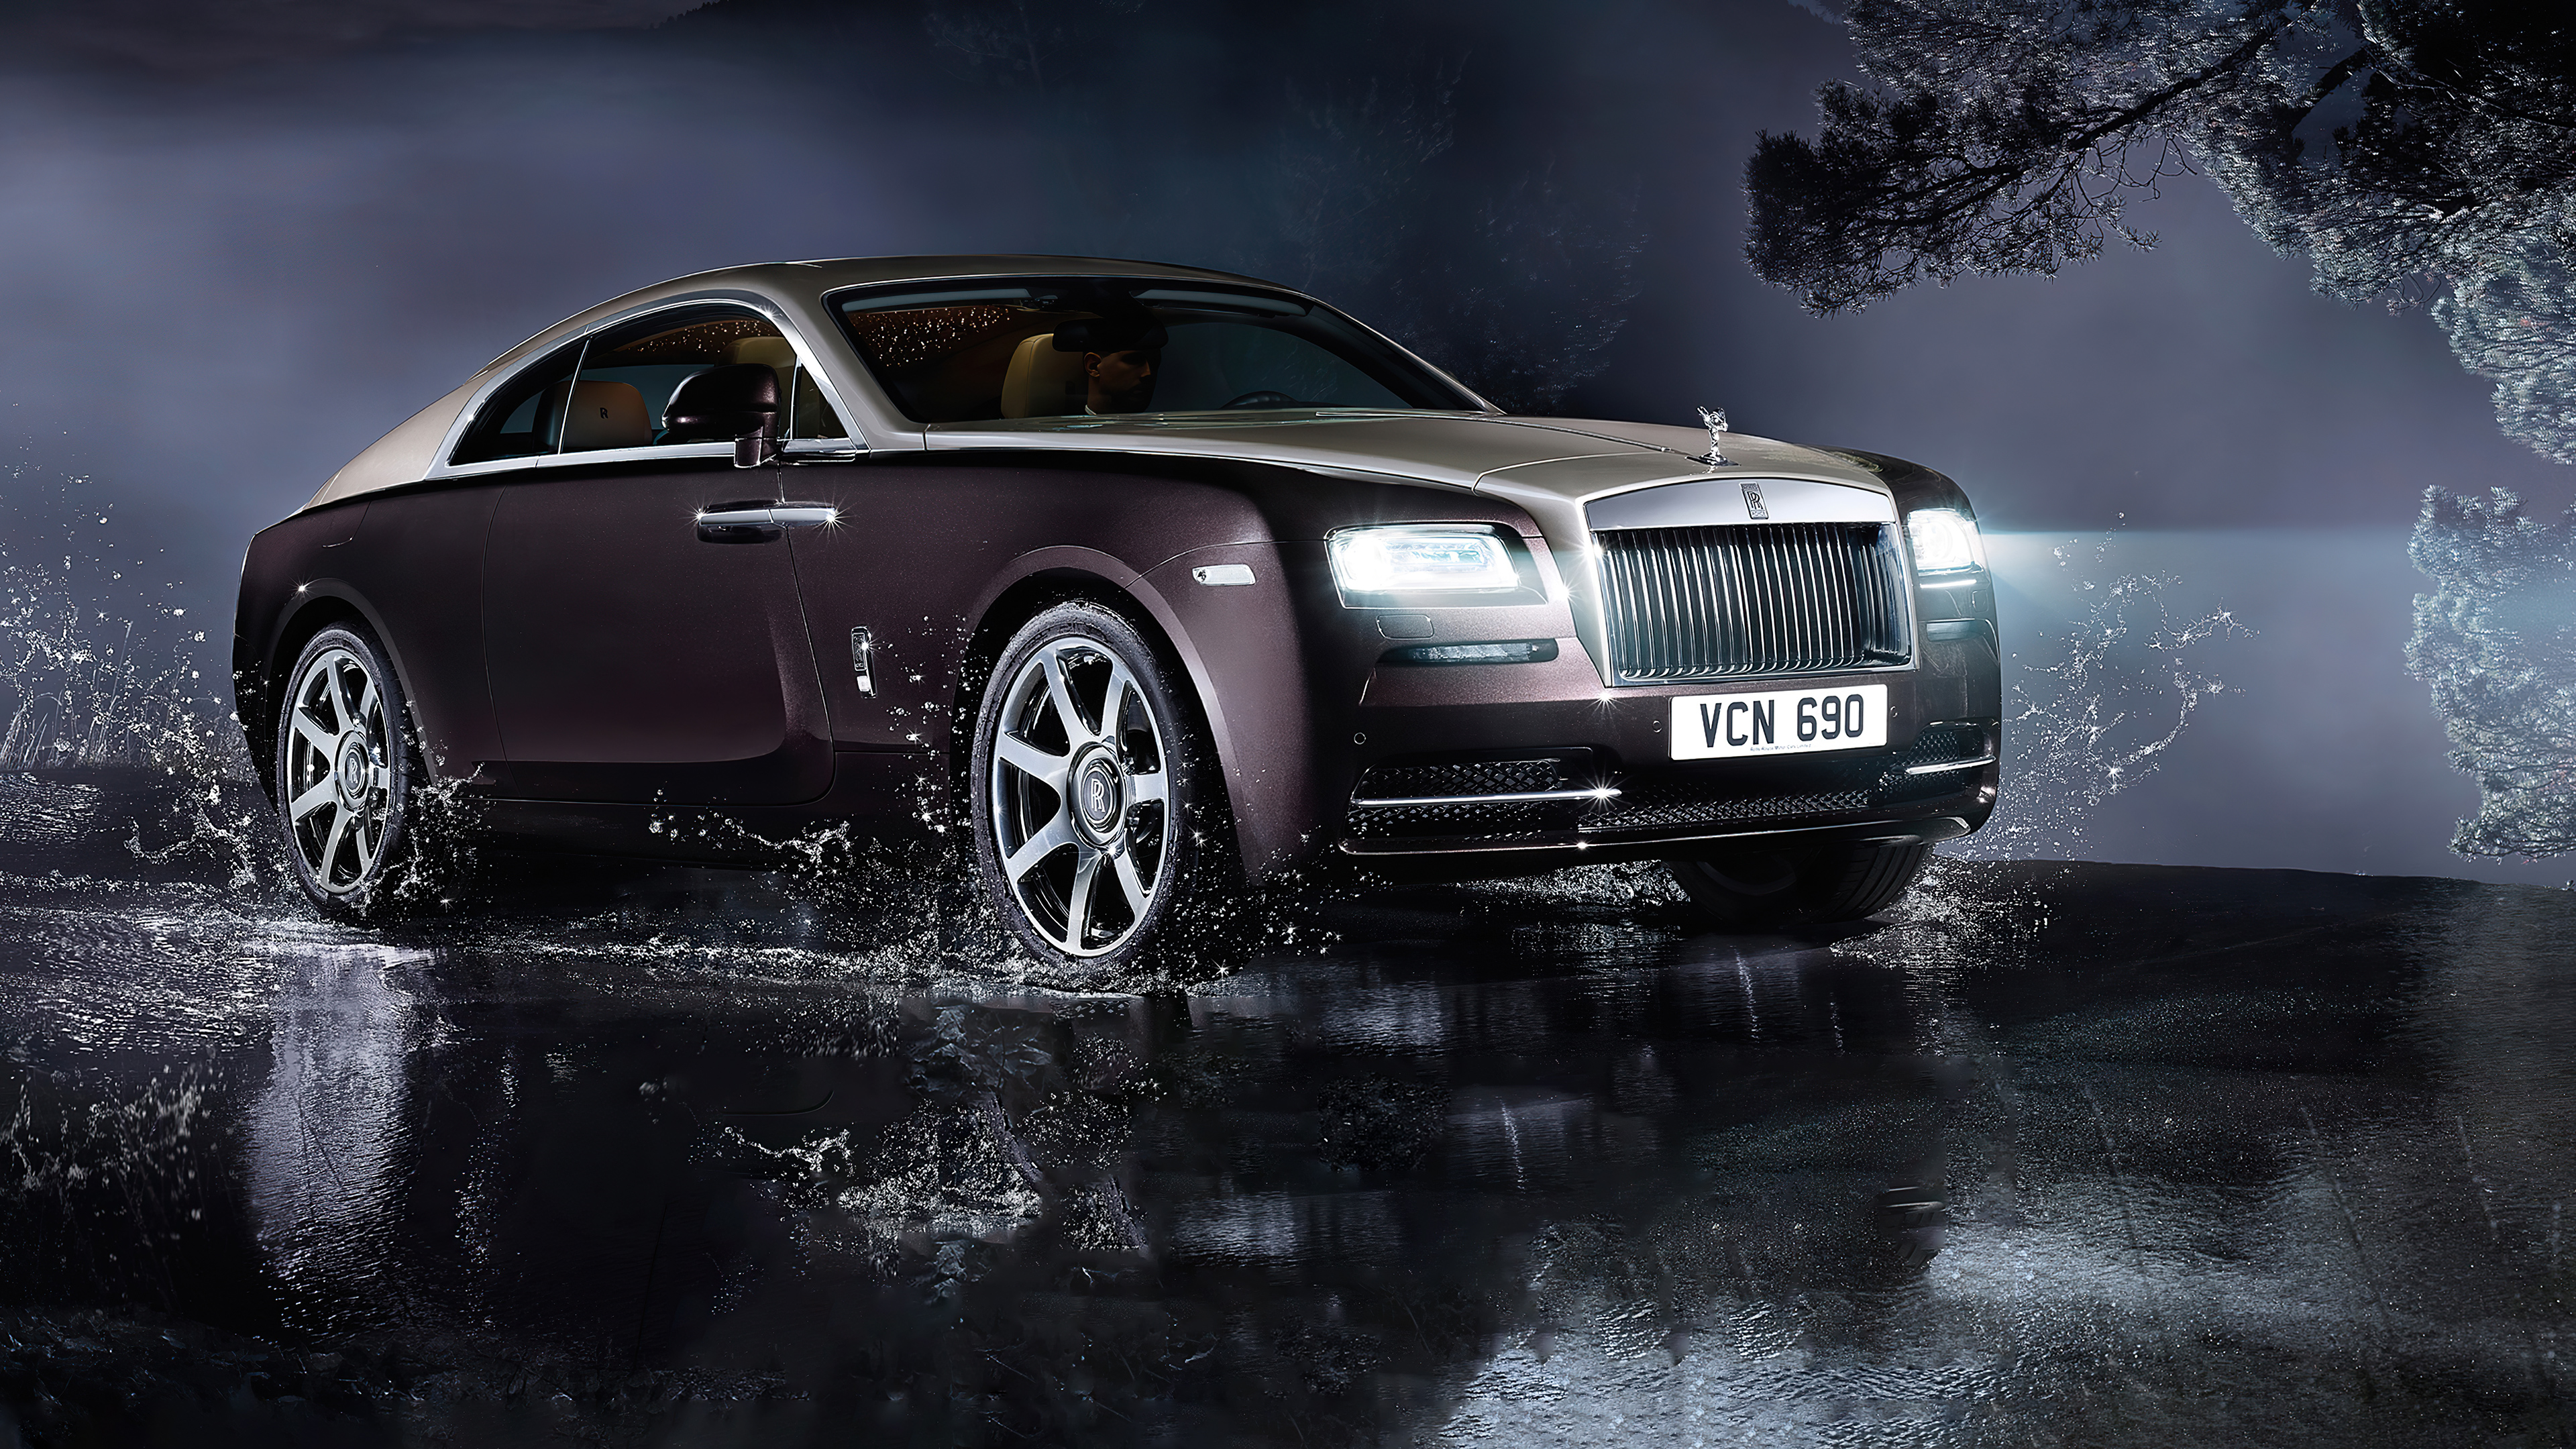 The Rolls Royce Wraith is driving on water.